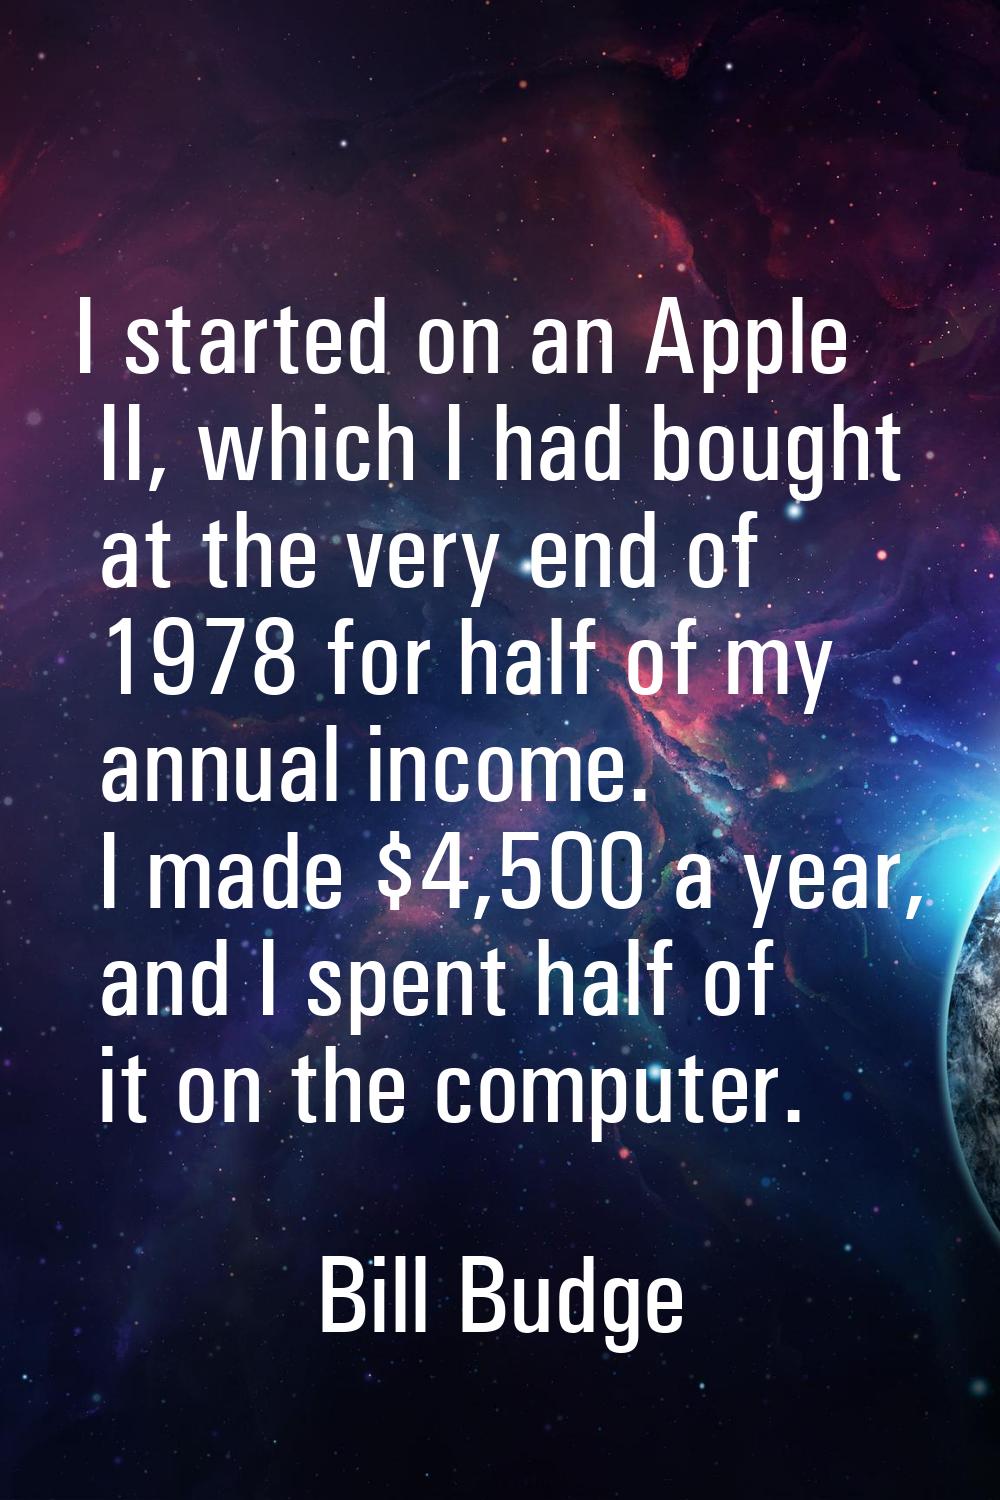 I started on an Apple II, which I had bought at the very end of 1978 for half of my annual income. 